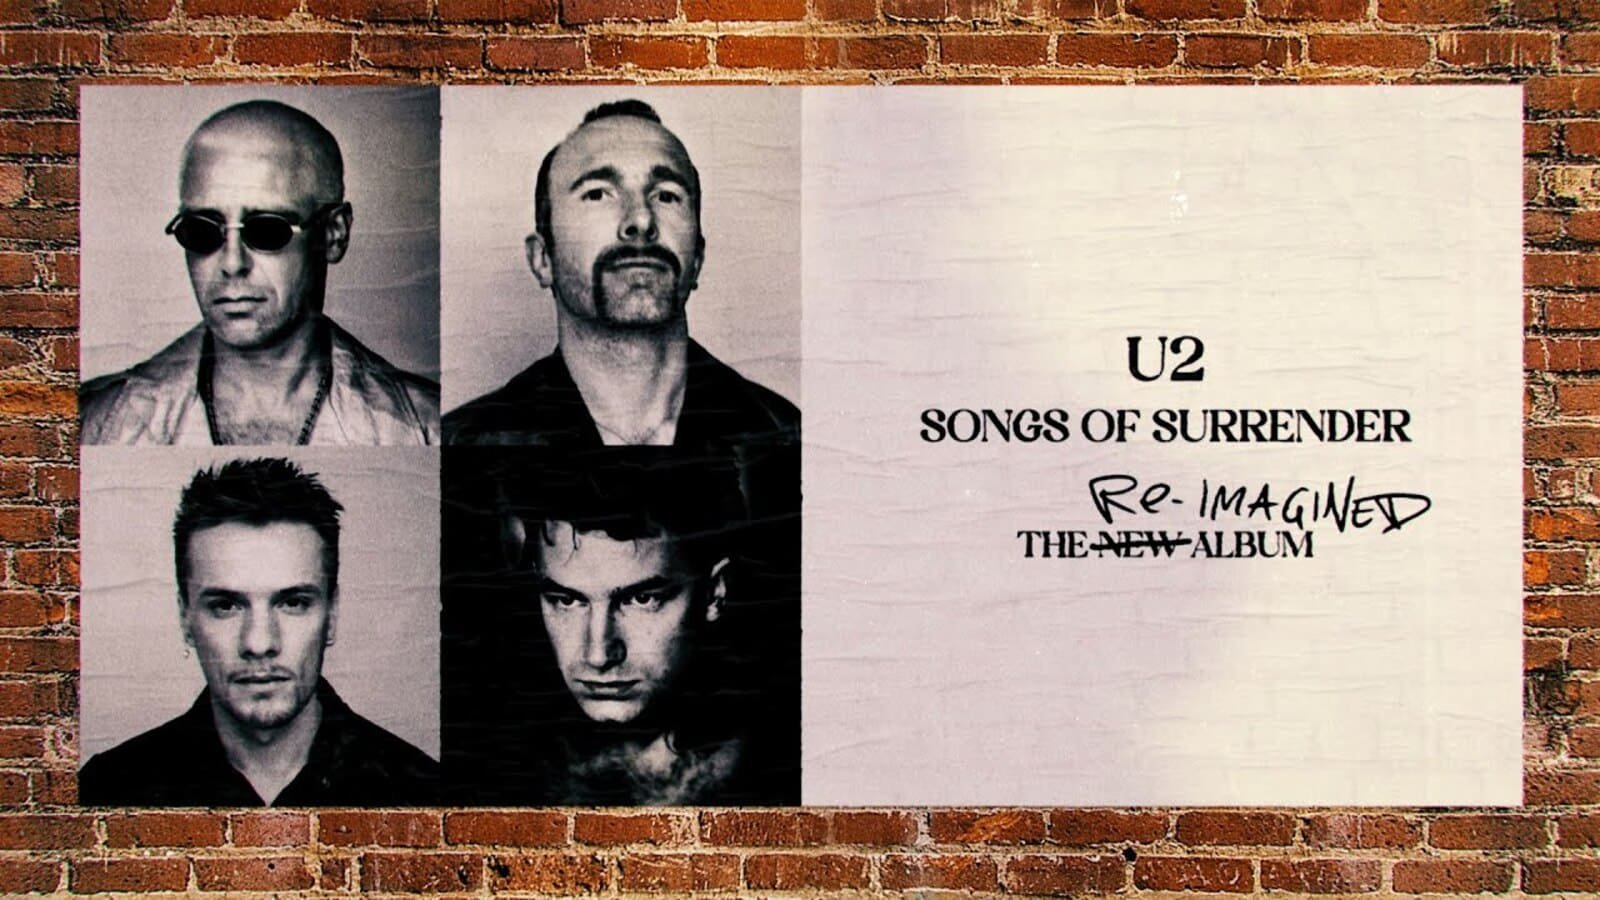 U2's Album ‘Songs of Surrender’: Everything You Need to Know